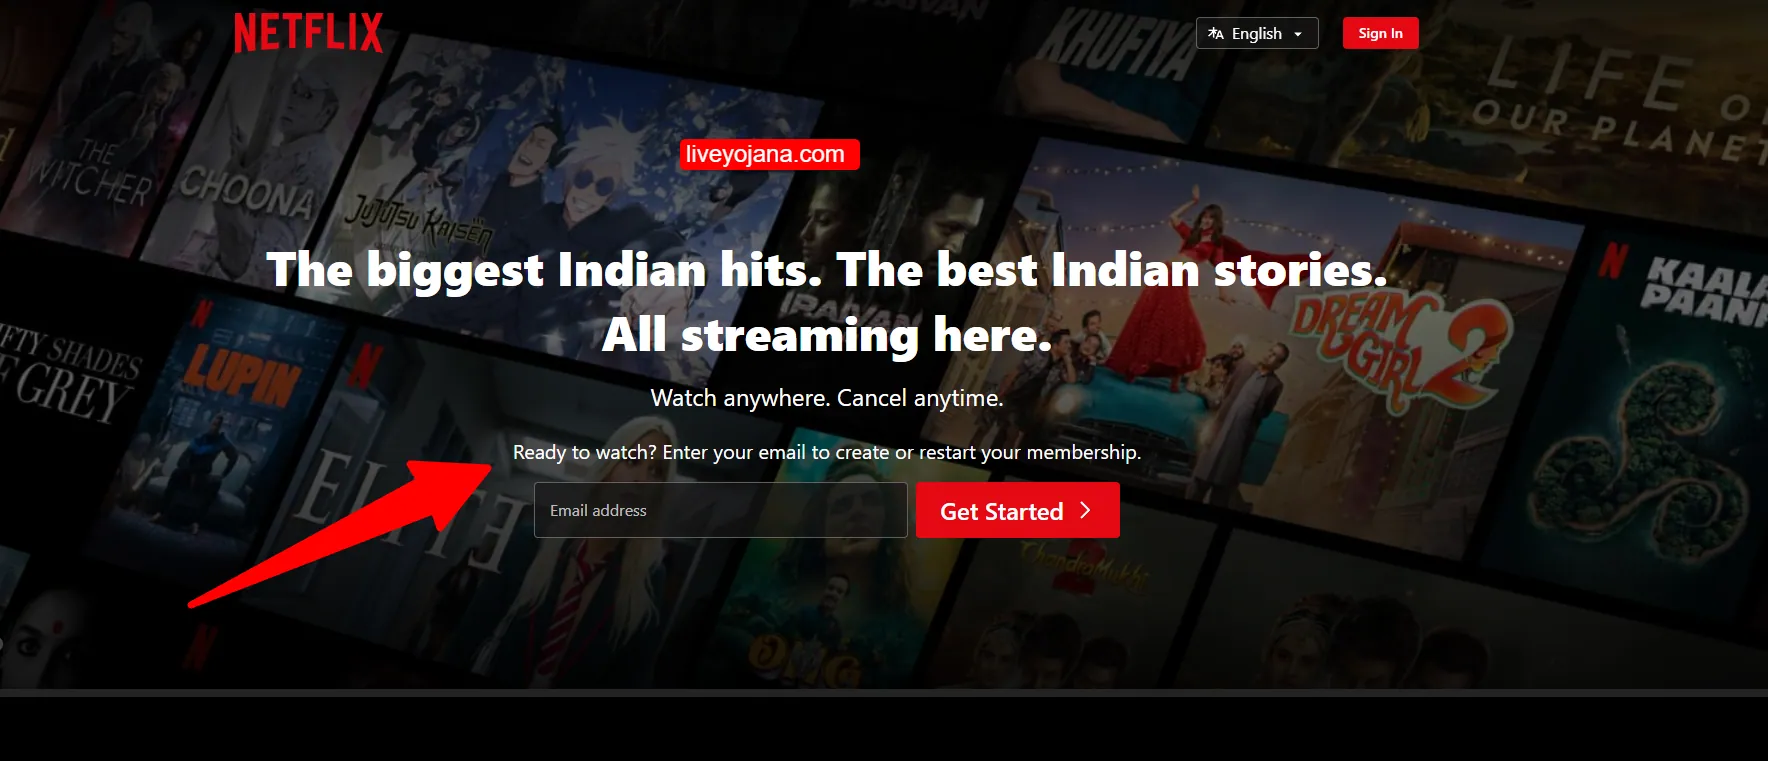 Top 11 SolarMovie Alternatives and Its Features Free movie websites India Top streaming platforms India Free online movie streams India